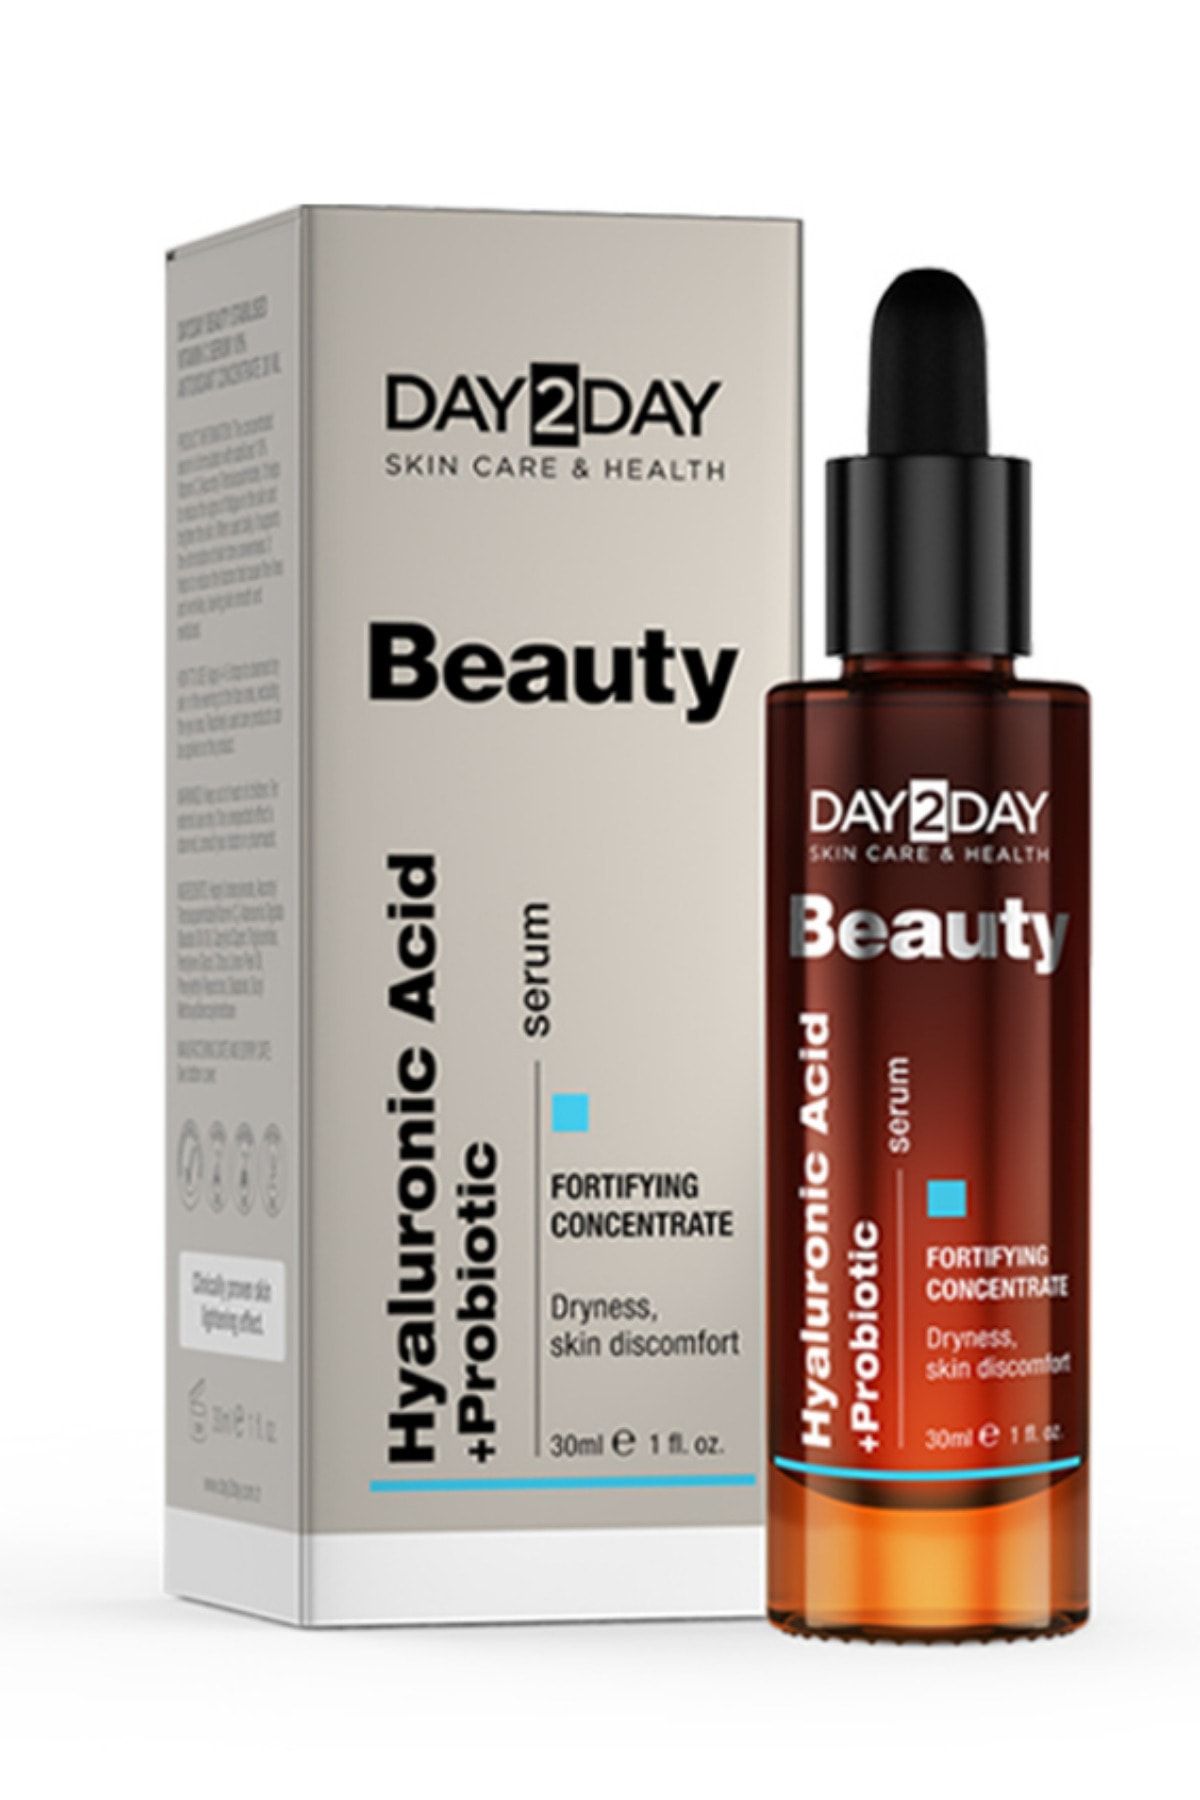 DAY2DAY Beauty Hyaluronic Acid + Probiotic Serum 30 Ml